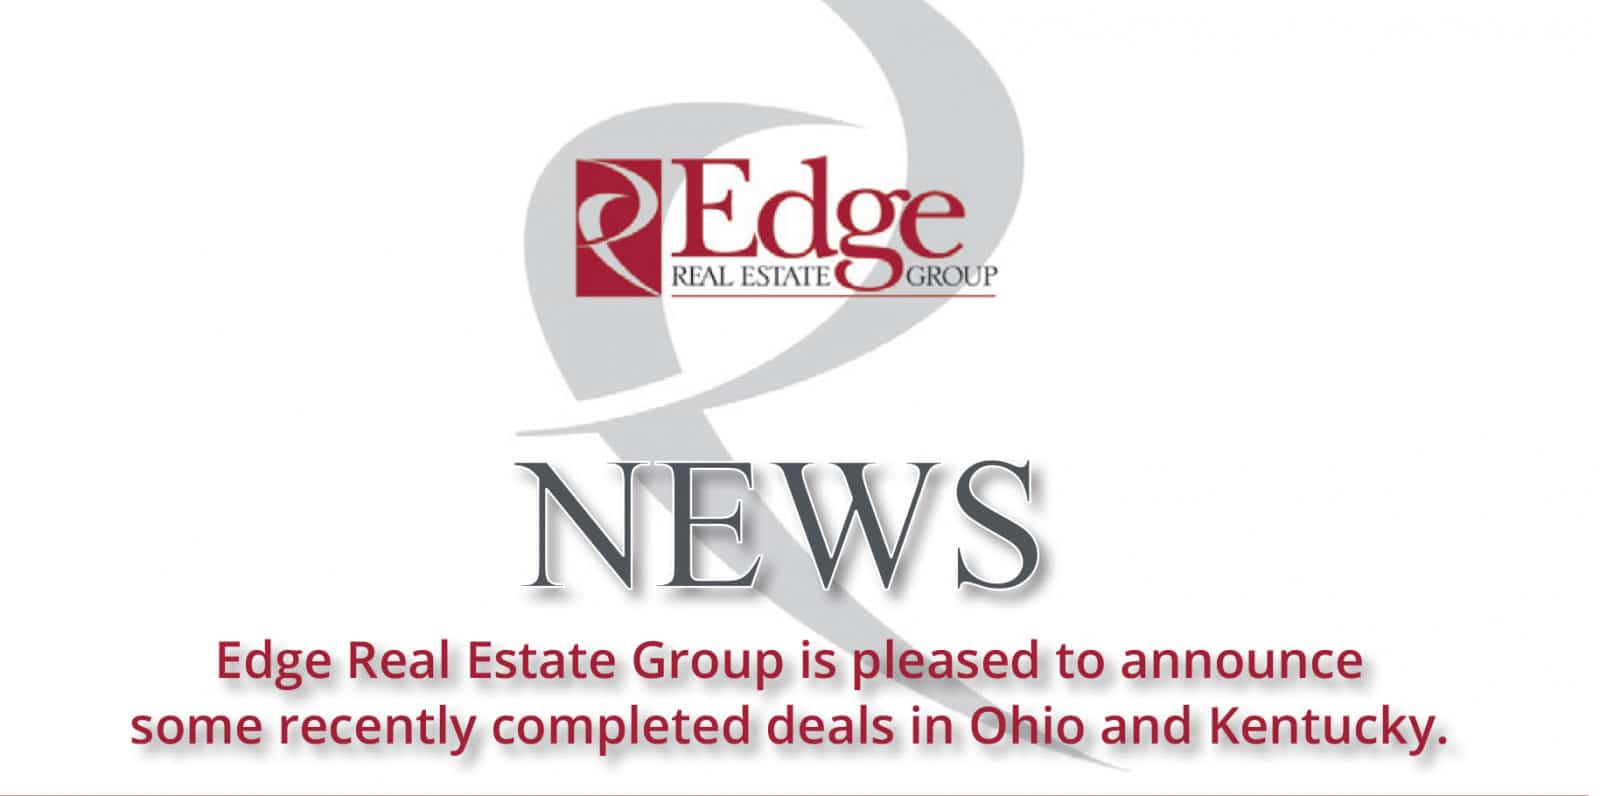 Edge recently completed deals